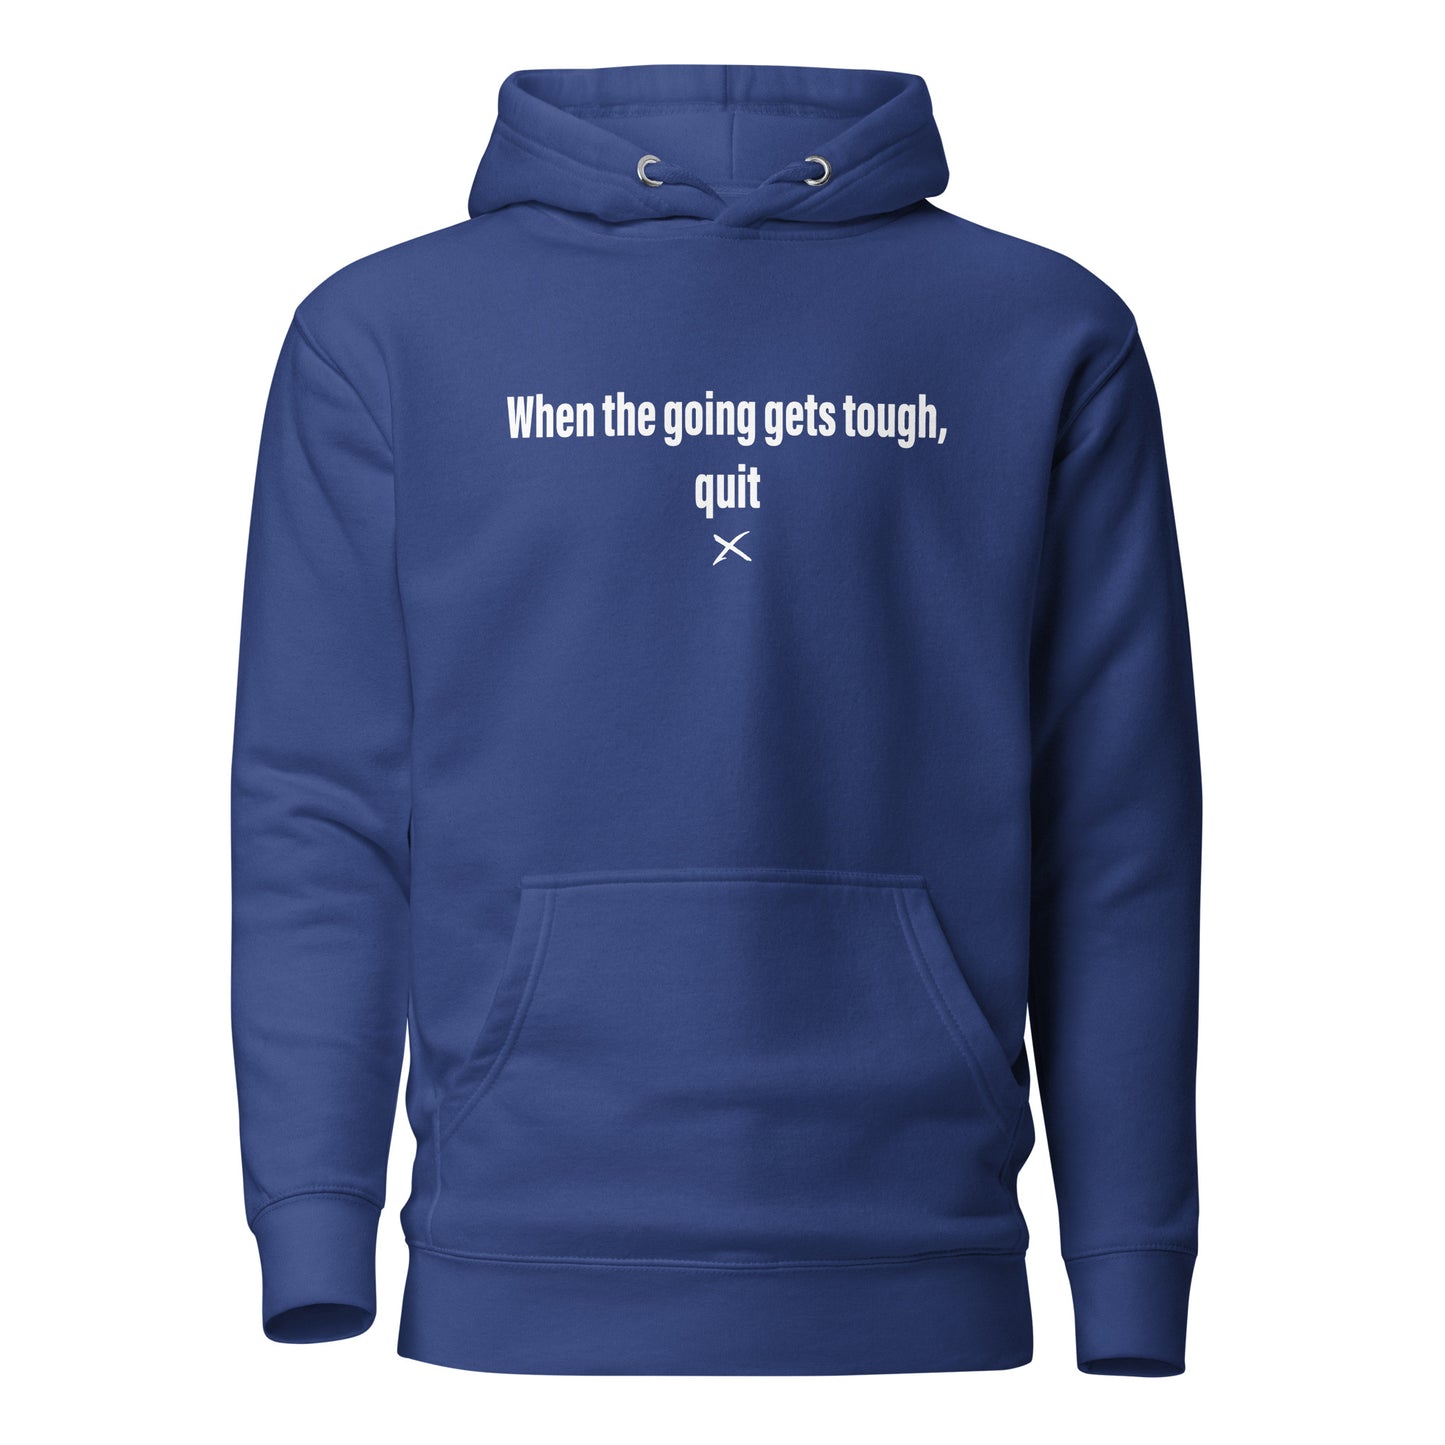 When the going gets tough, quit - Hoodie